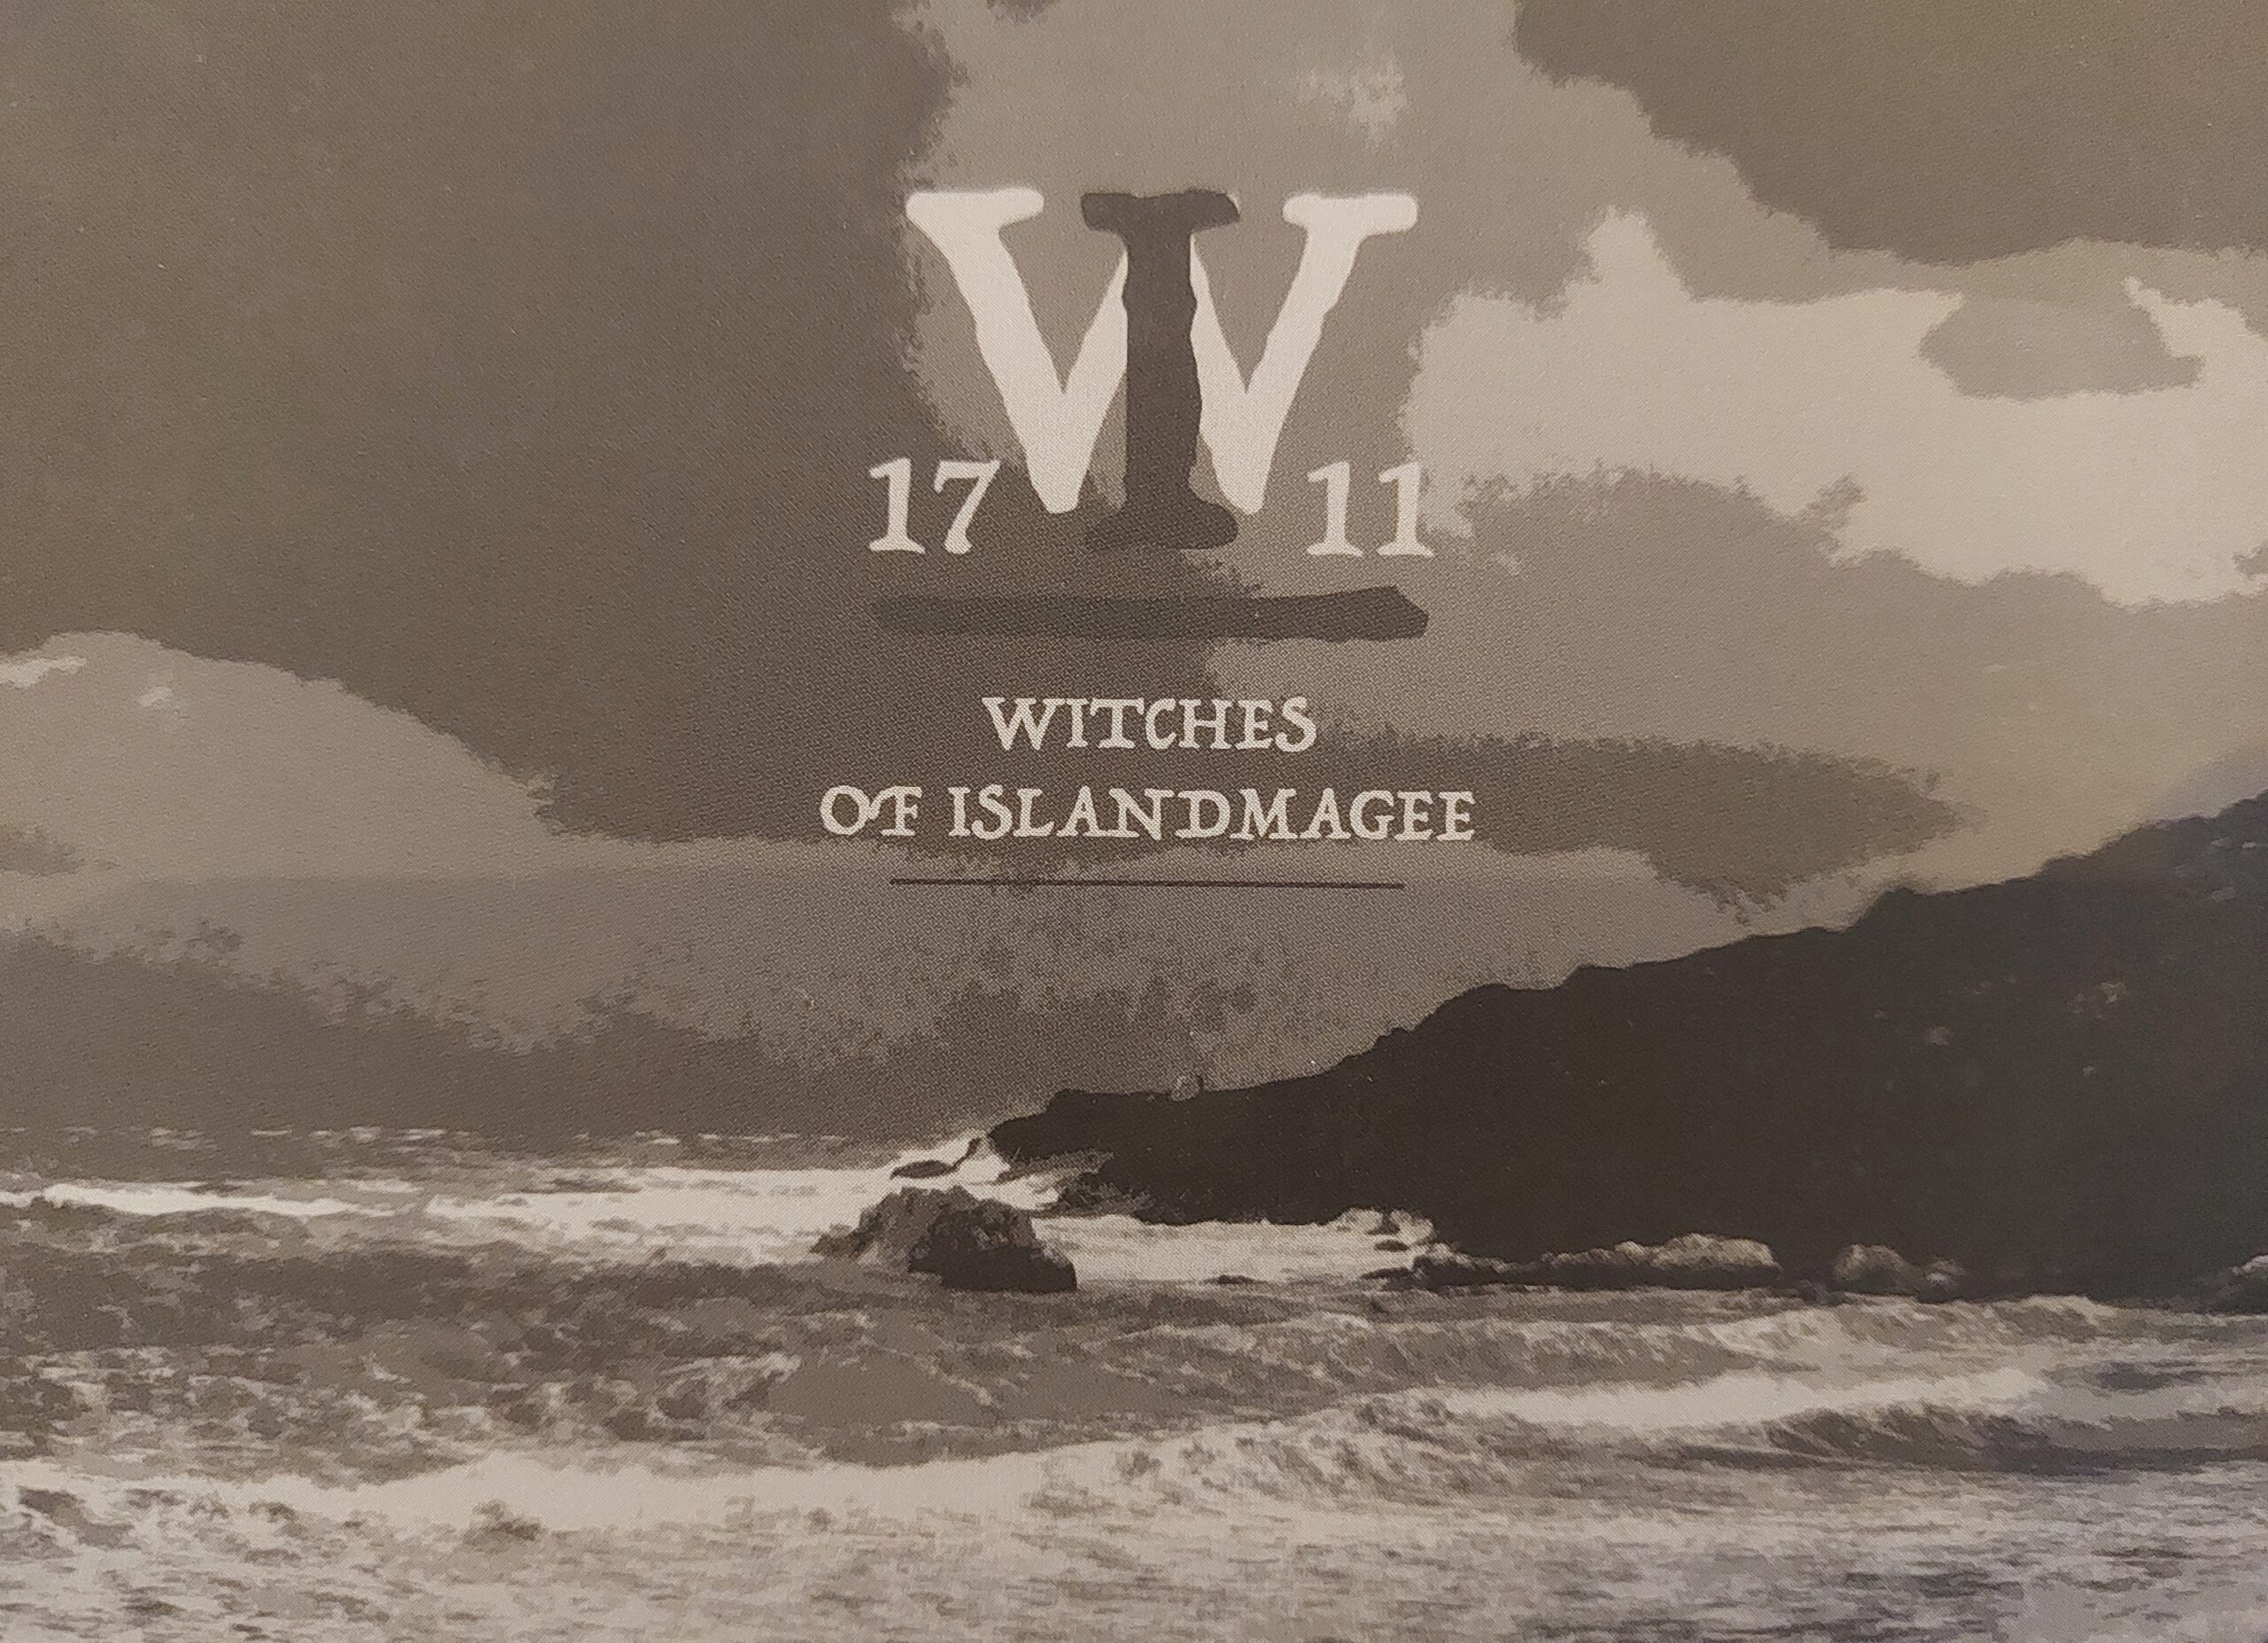 postcard with black and white image of the Antrim coastline with the logo of the W1711 Witches of Islandmagee exhibition.